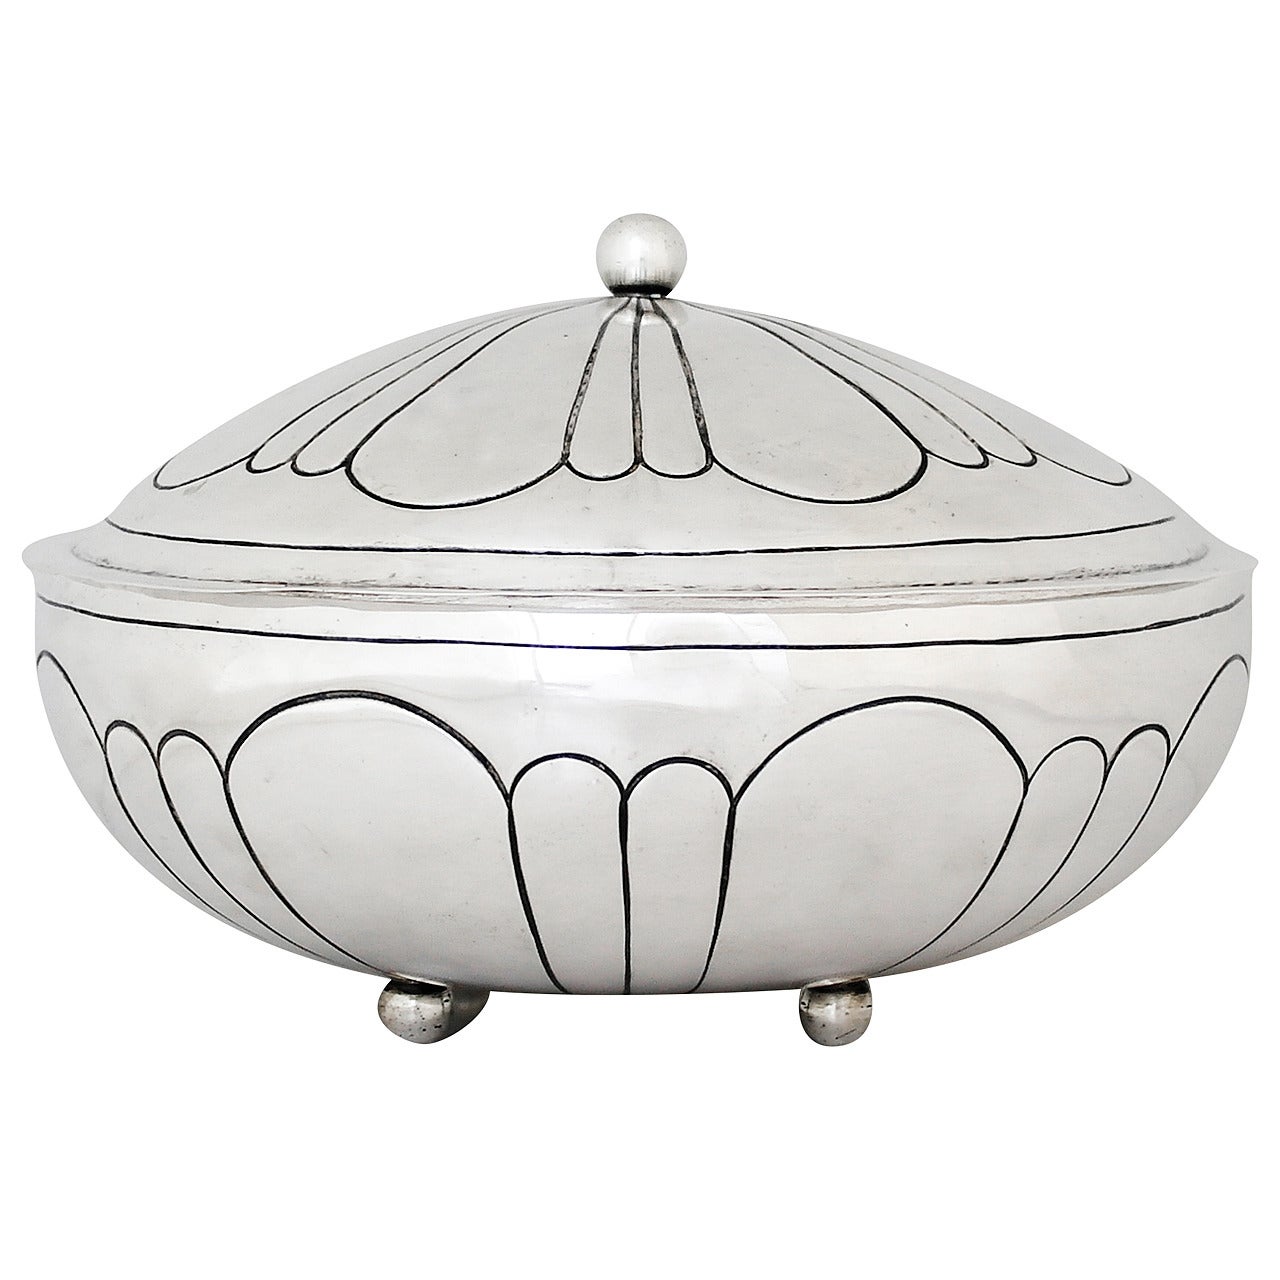 Maciel Art Deco Sterling Silver Serving Bowl with Lid and Ladle For Sale